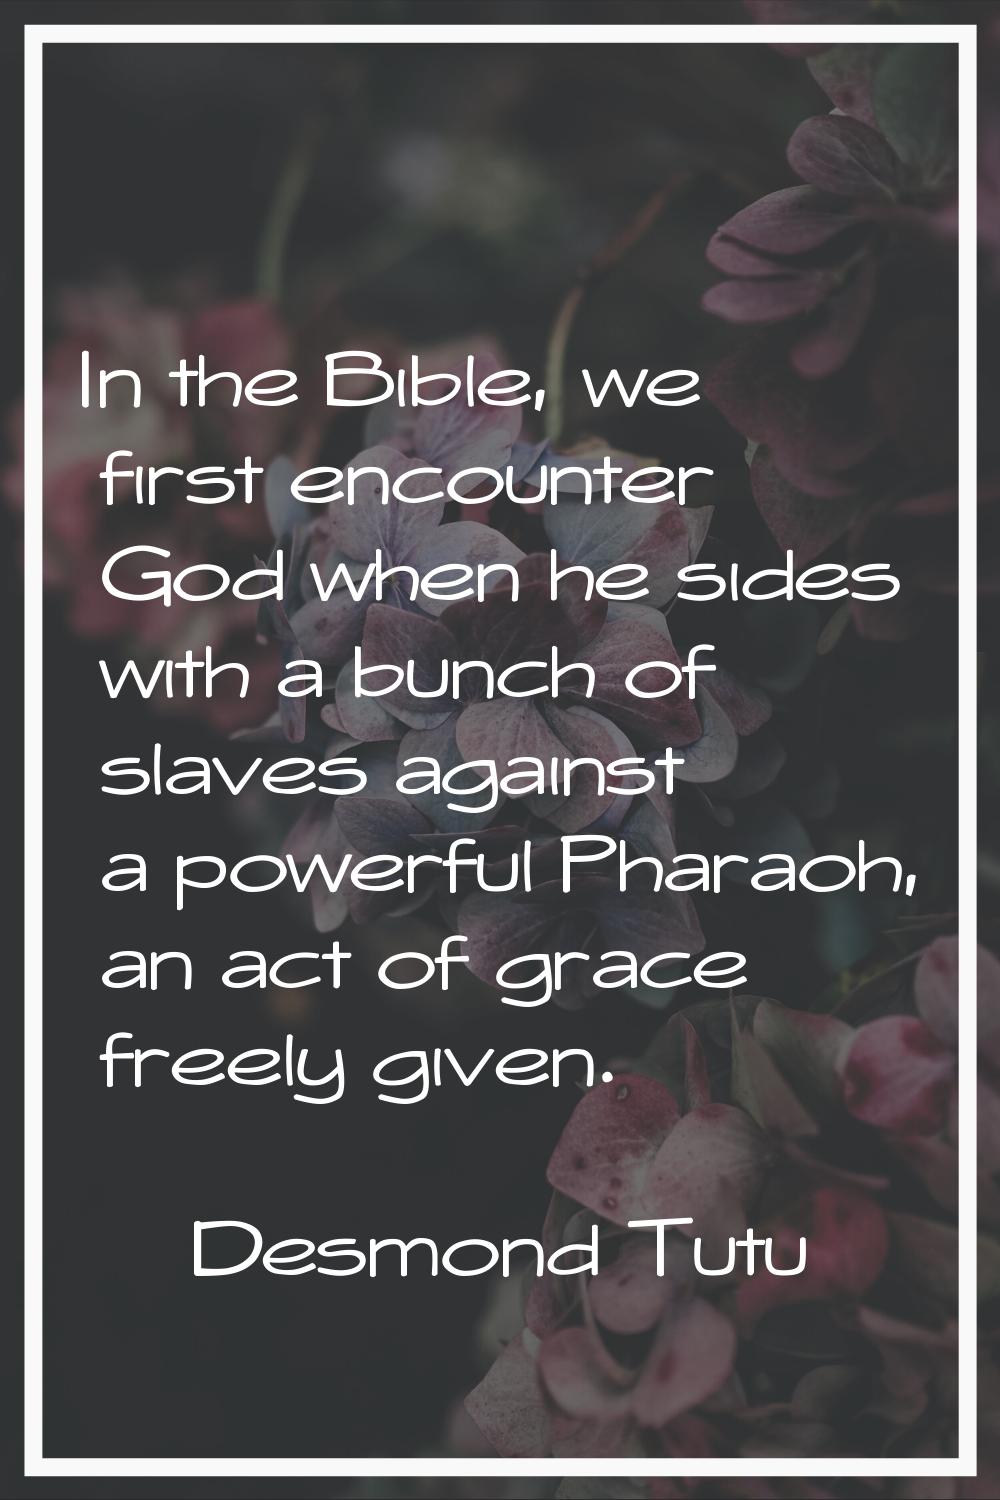 In the Bible, we first encounter God when he sides with a bunch of slaves against a powerful Pharao